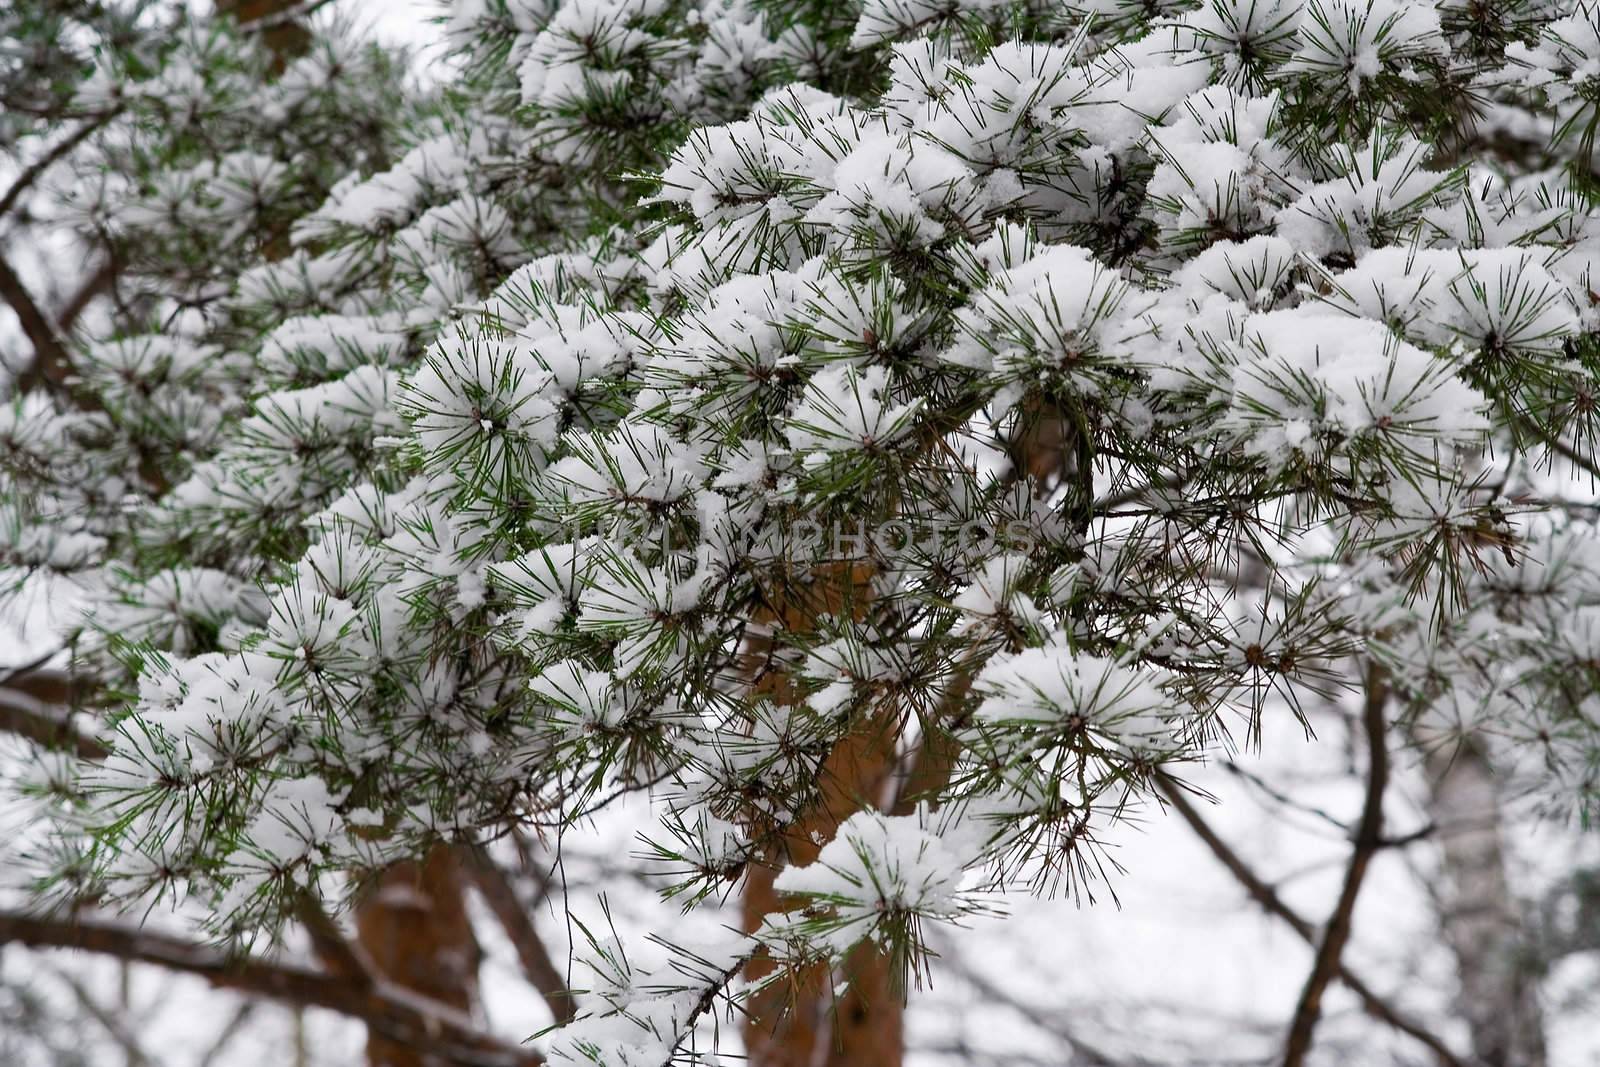 Snow on Pine Branches by Sergius